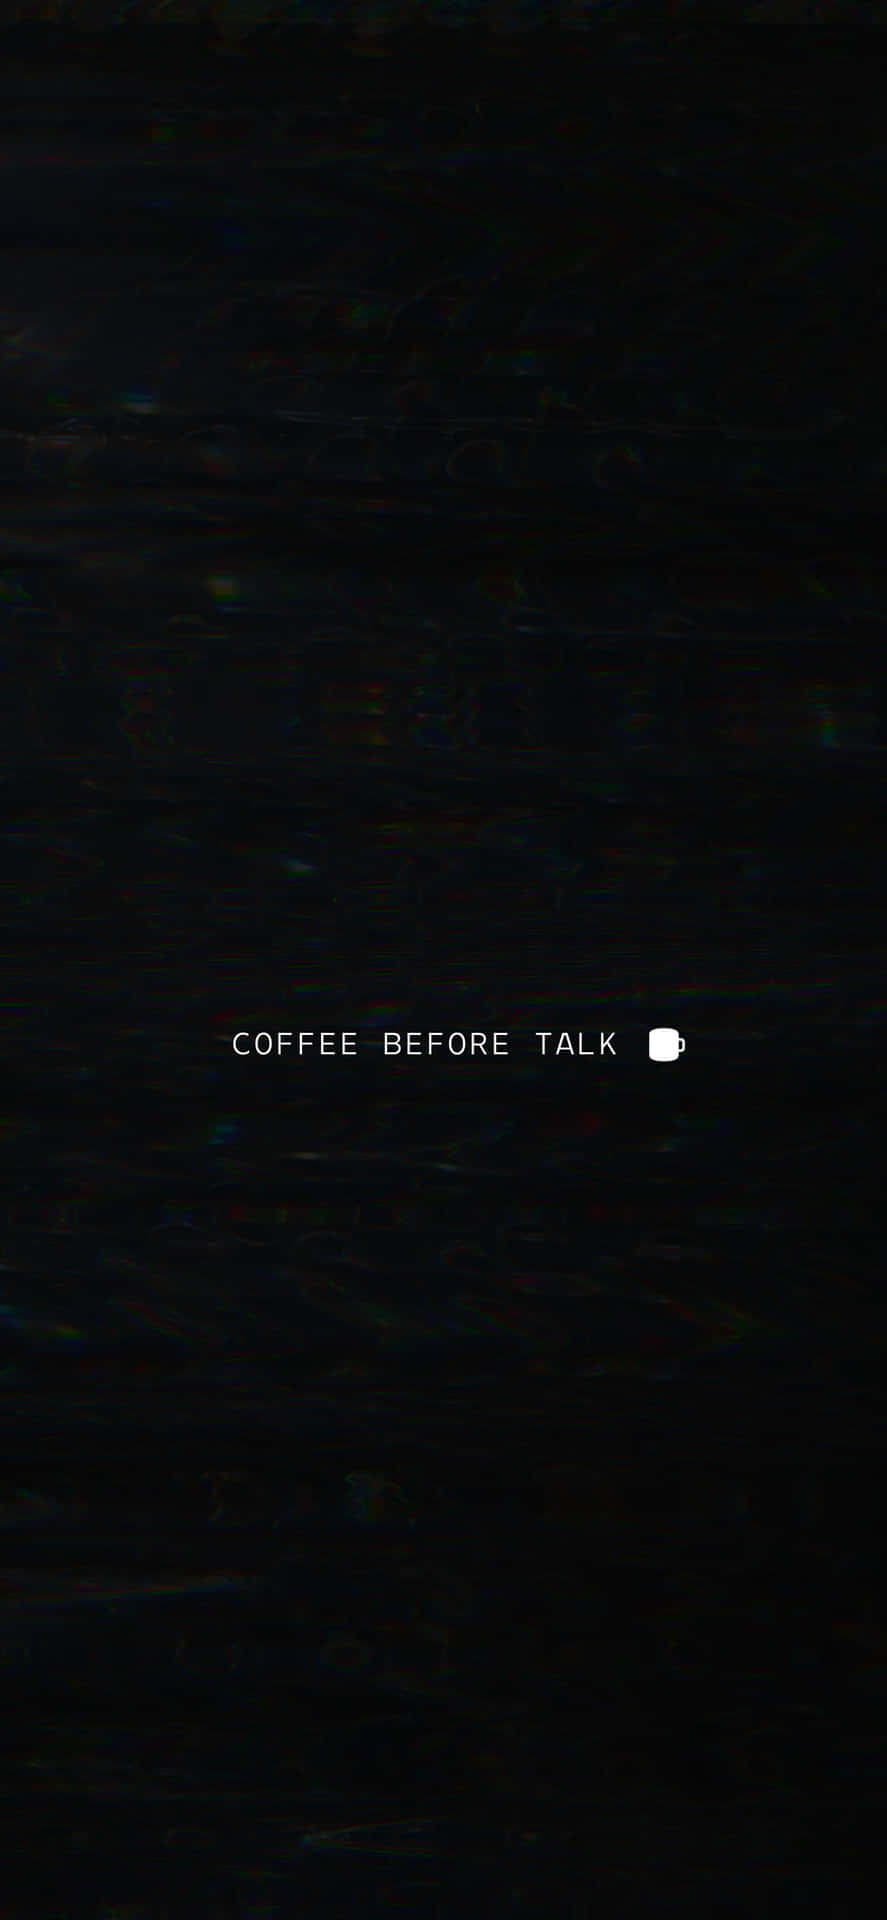 Coffee Before Talk - A Black Background With White Text